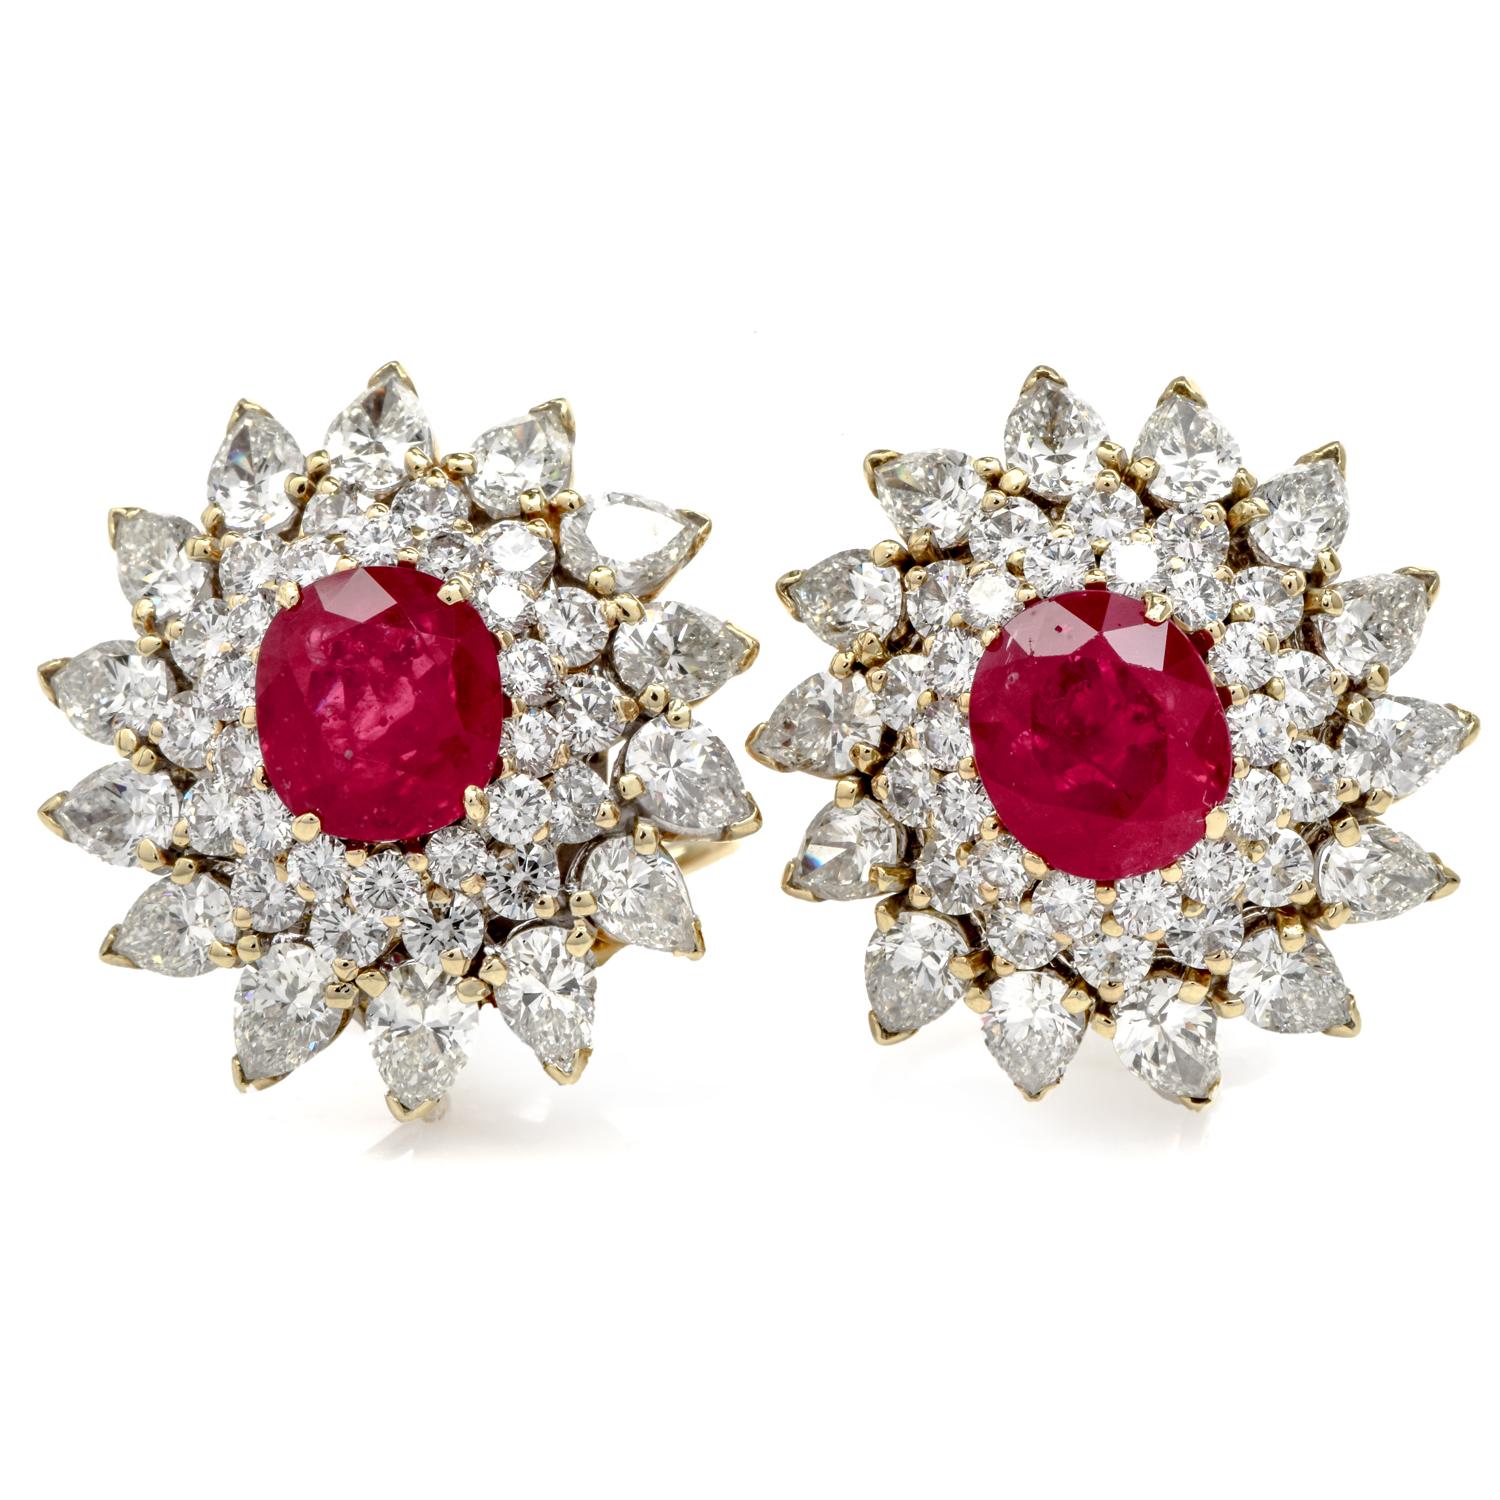 Vintage from Circa 1970s Flower Inspired Clip On Highly Sparkly Earrings.

Crafted in luxurious 18k yellow gold.

Enhanced in the center with Genuine Rubies with vivid red color, surrounded by three halos of  (56) round-cut & (30) Pear